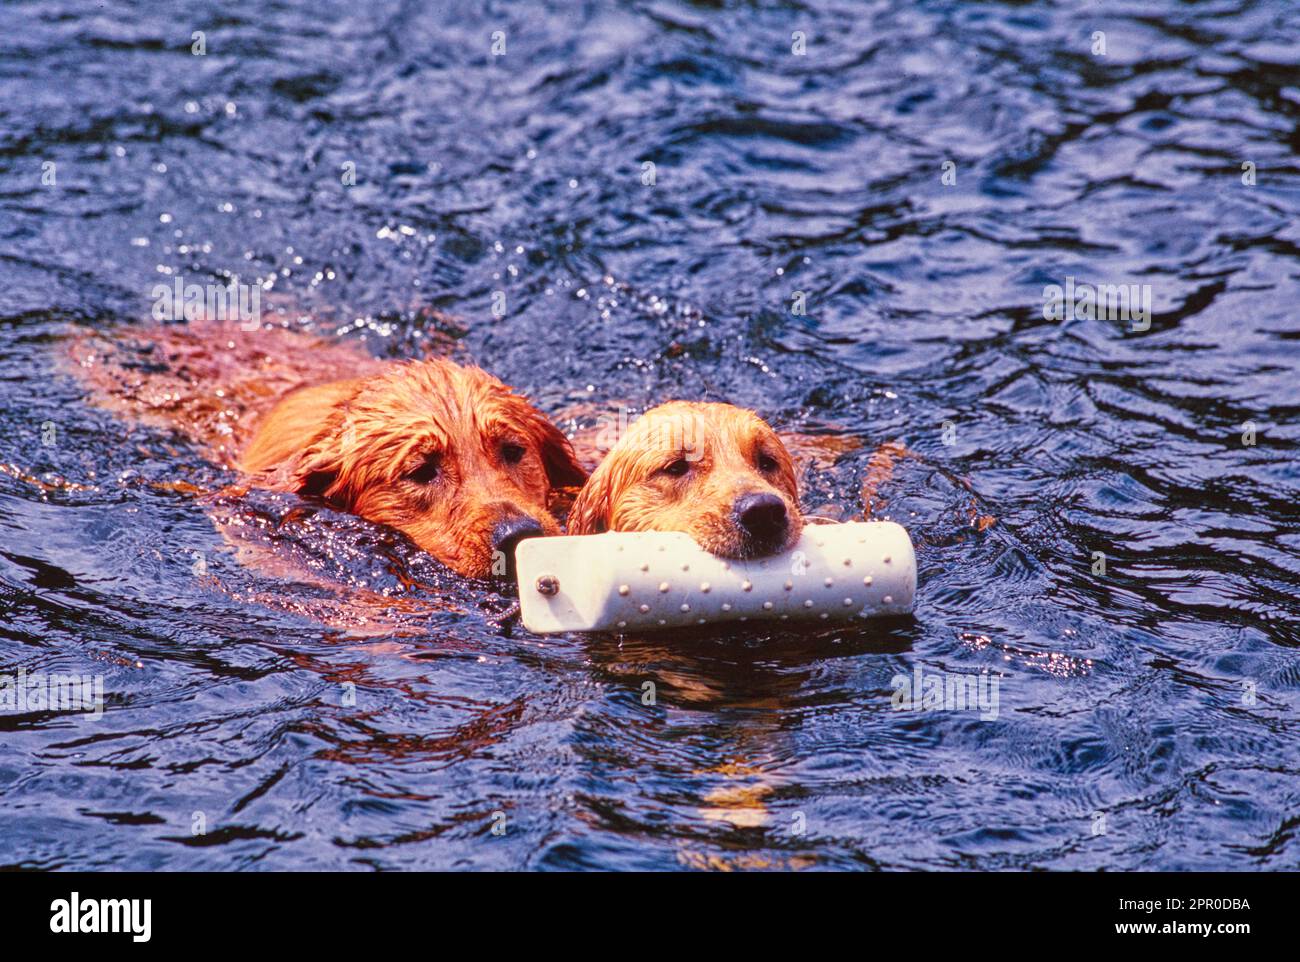 Two golden retrievers swimming in water outside carrying floating toy Stock Photo